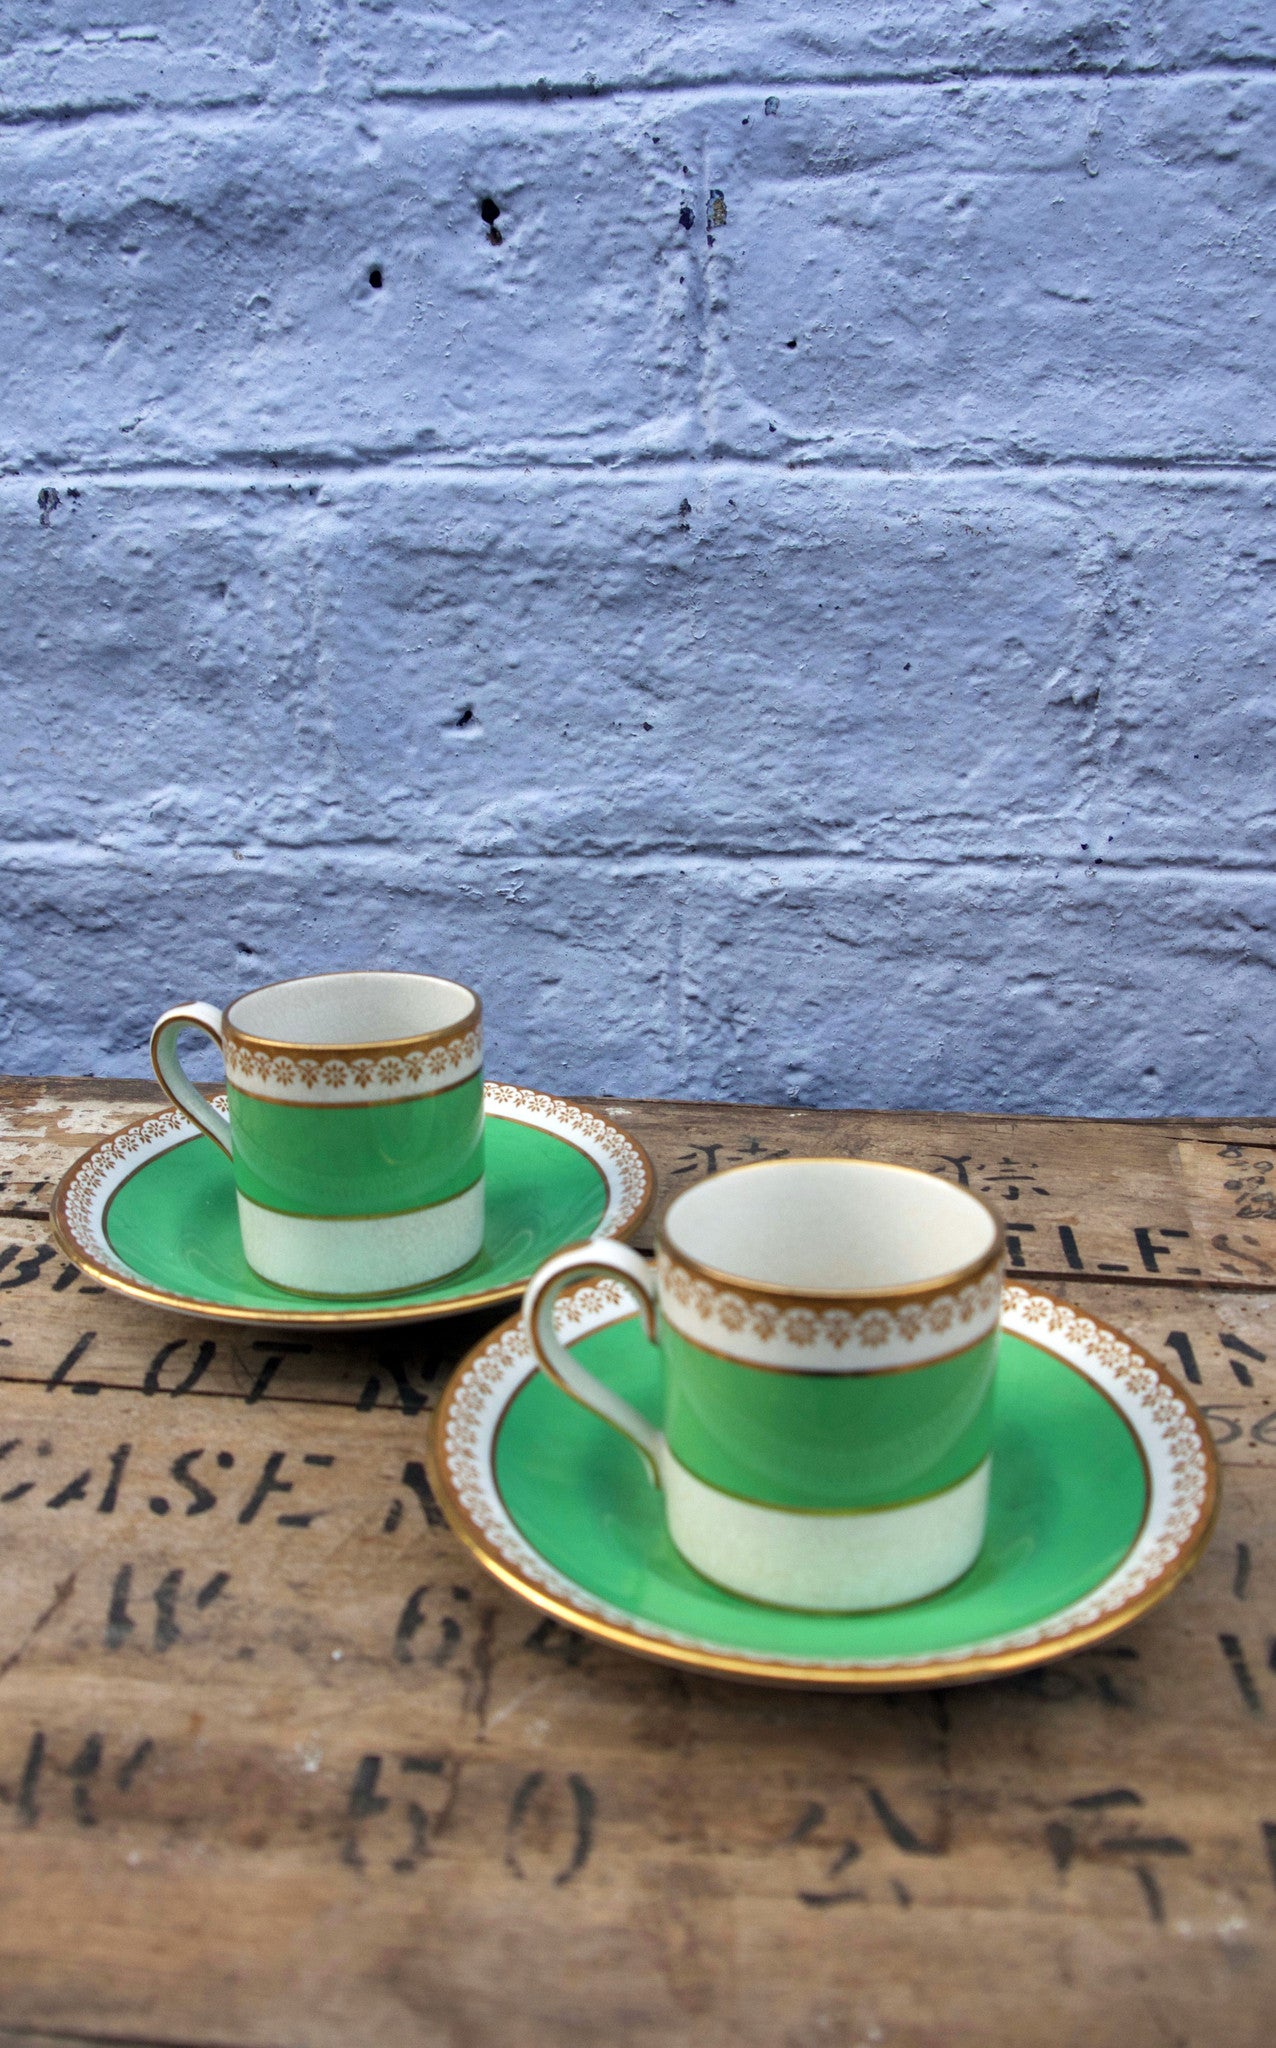 vintage set of 2 green and gold tea / coffee cups. in lovely condition, tea for 2.